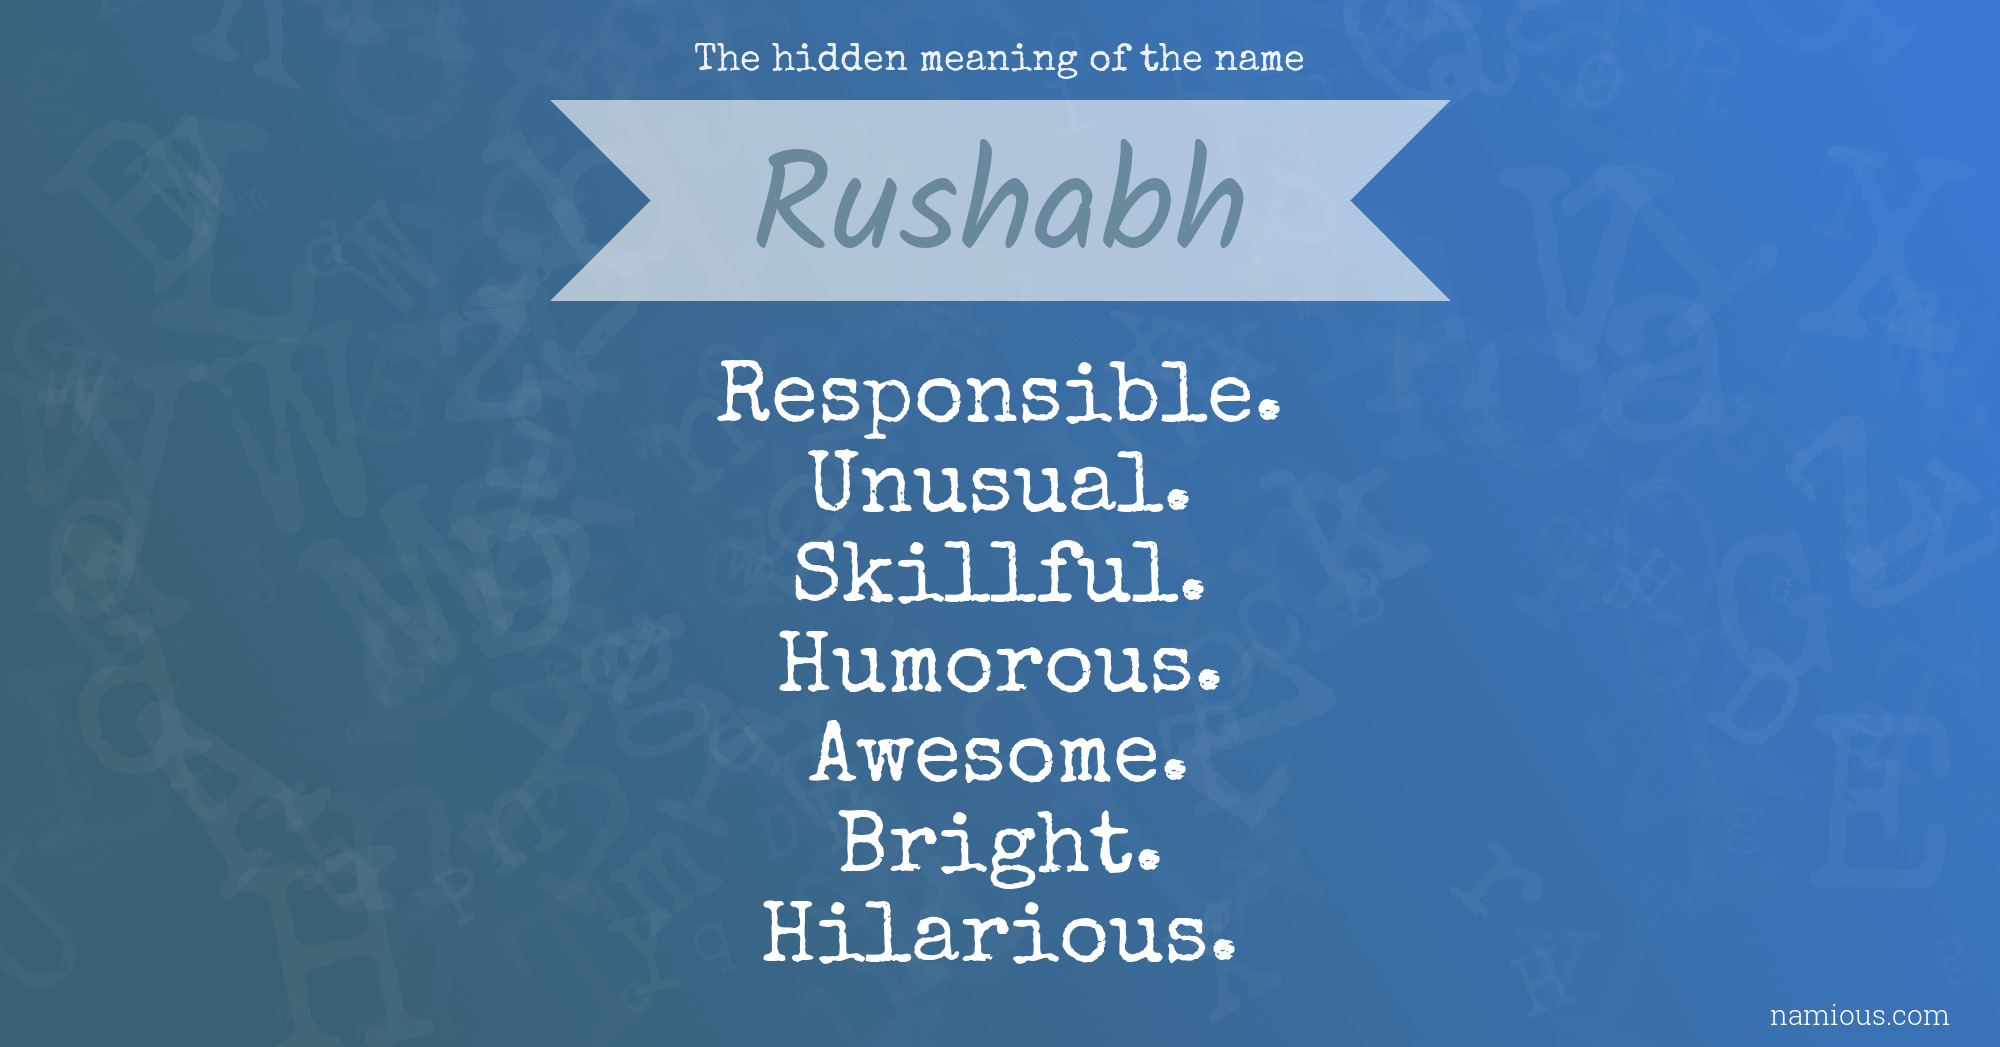 The hidden meaning of the name Rushabh